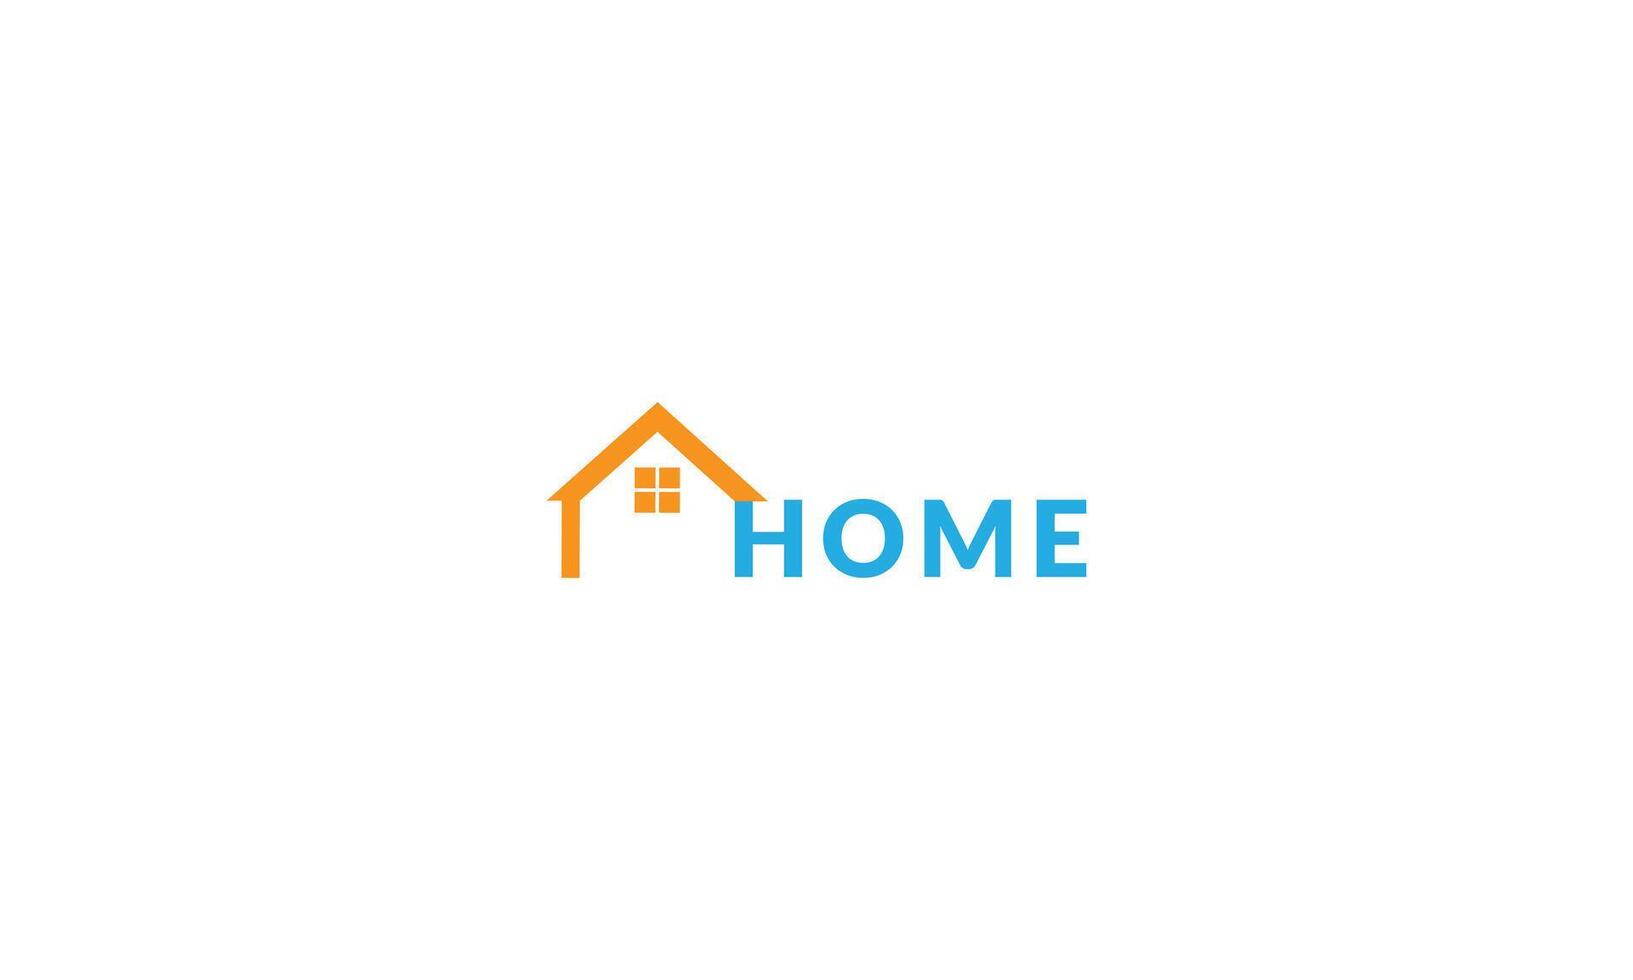 Our logo, with its cozy house design, is a testament to the sense of belonging we provide. vector